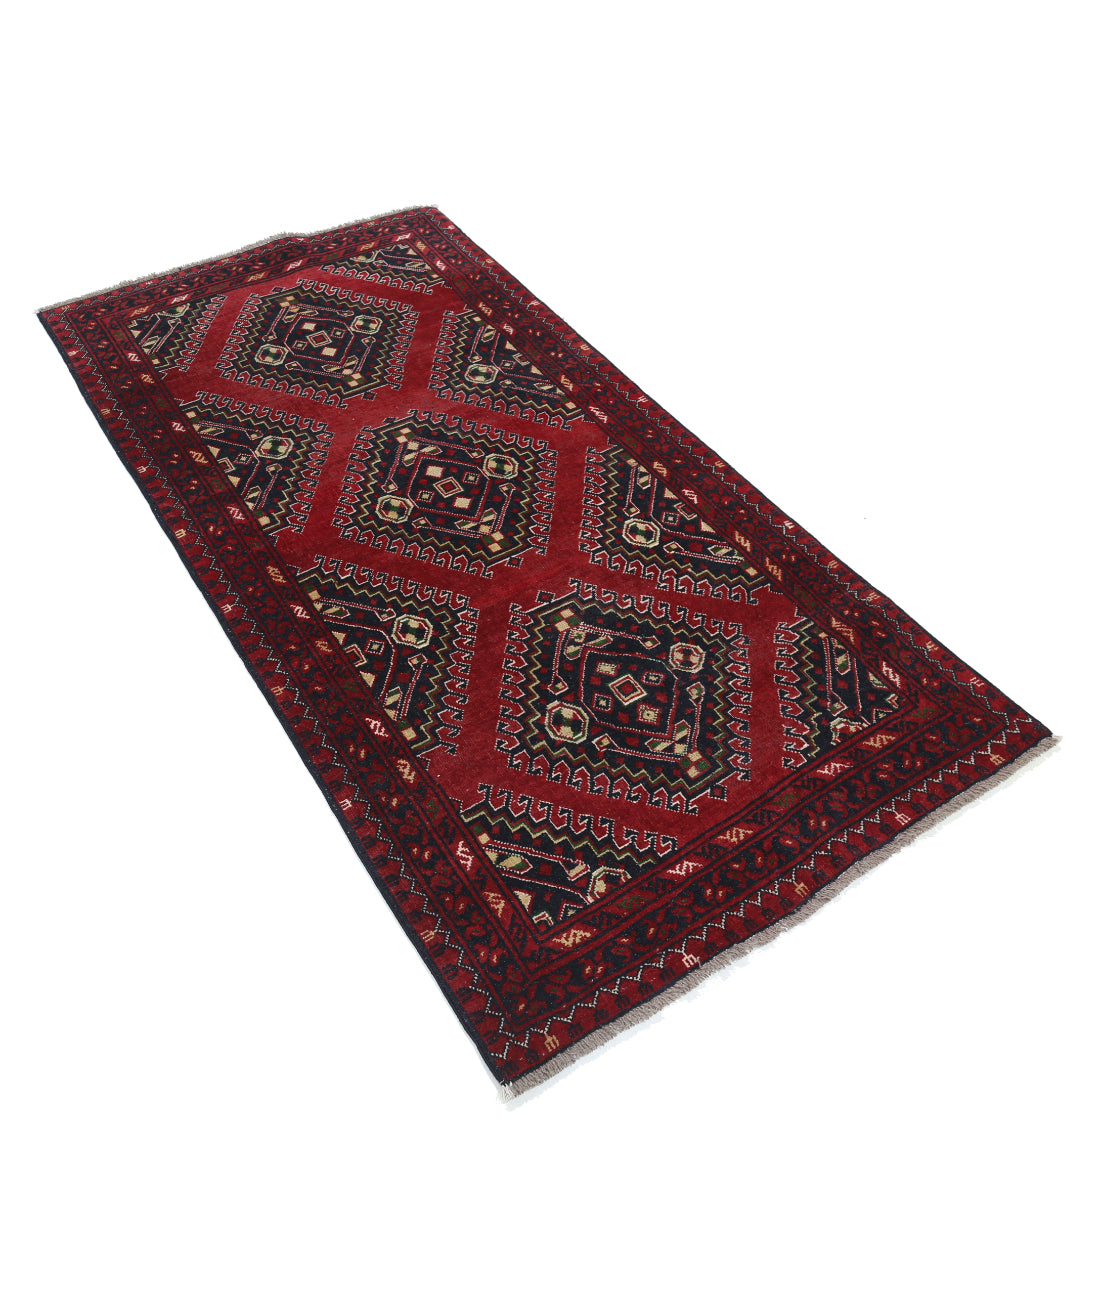 Afghan 3' 2" X 6' 5" Hand-Knotted Wool Rug 3' 2" X 6' 5" (97 X 196) / Red / Blue